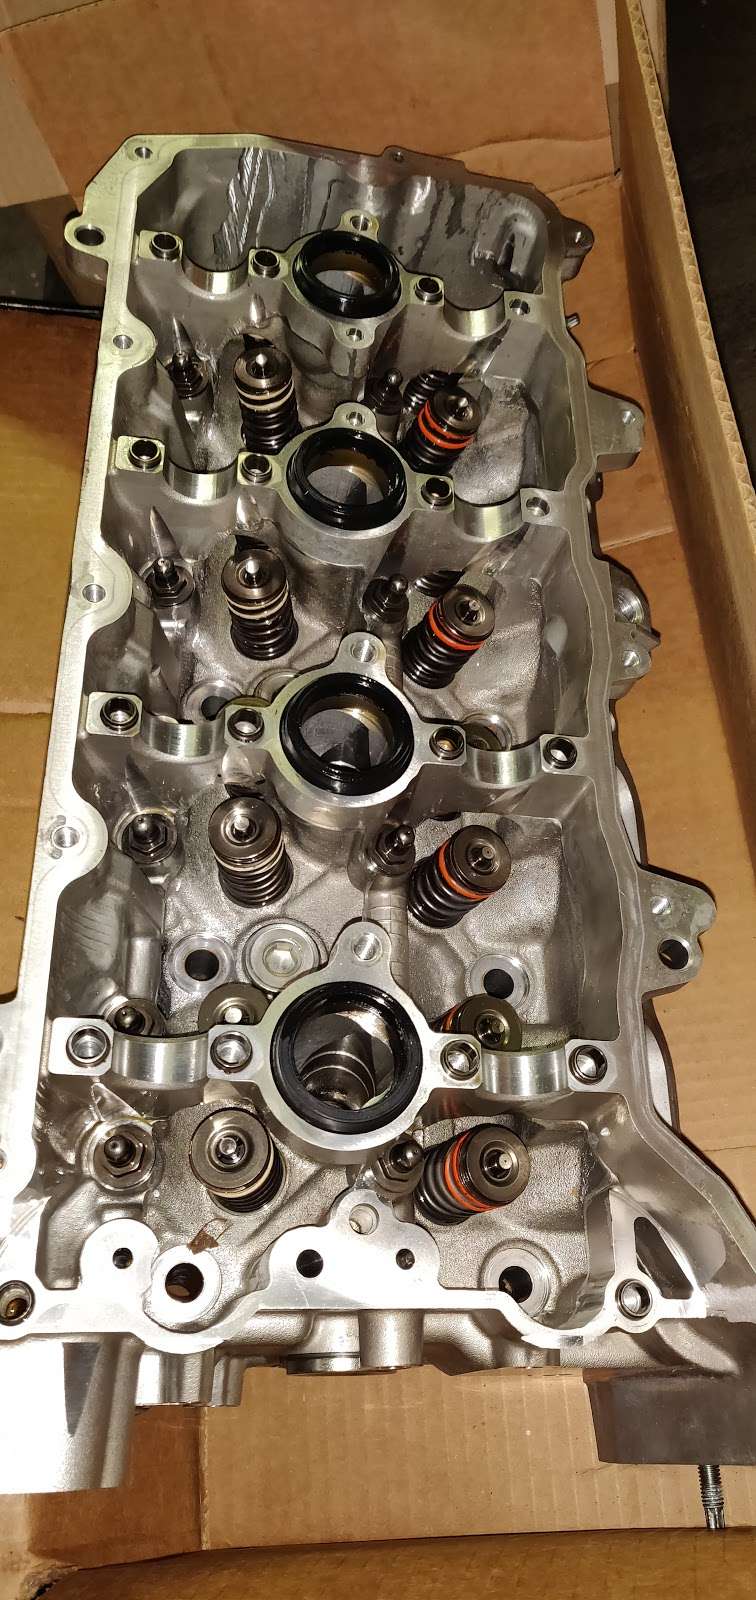 Ams Racing Engines | 9426 W Schlinger Ave, Milwaukee, WI 53214, USA | Phone: (414) 774-7005